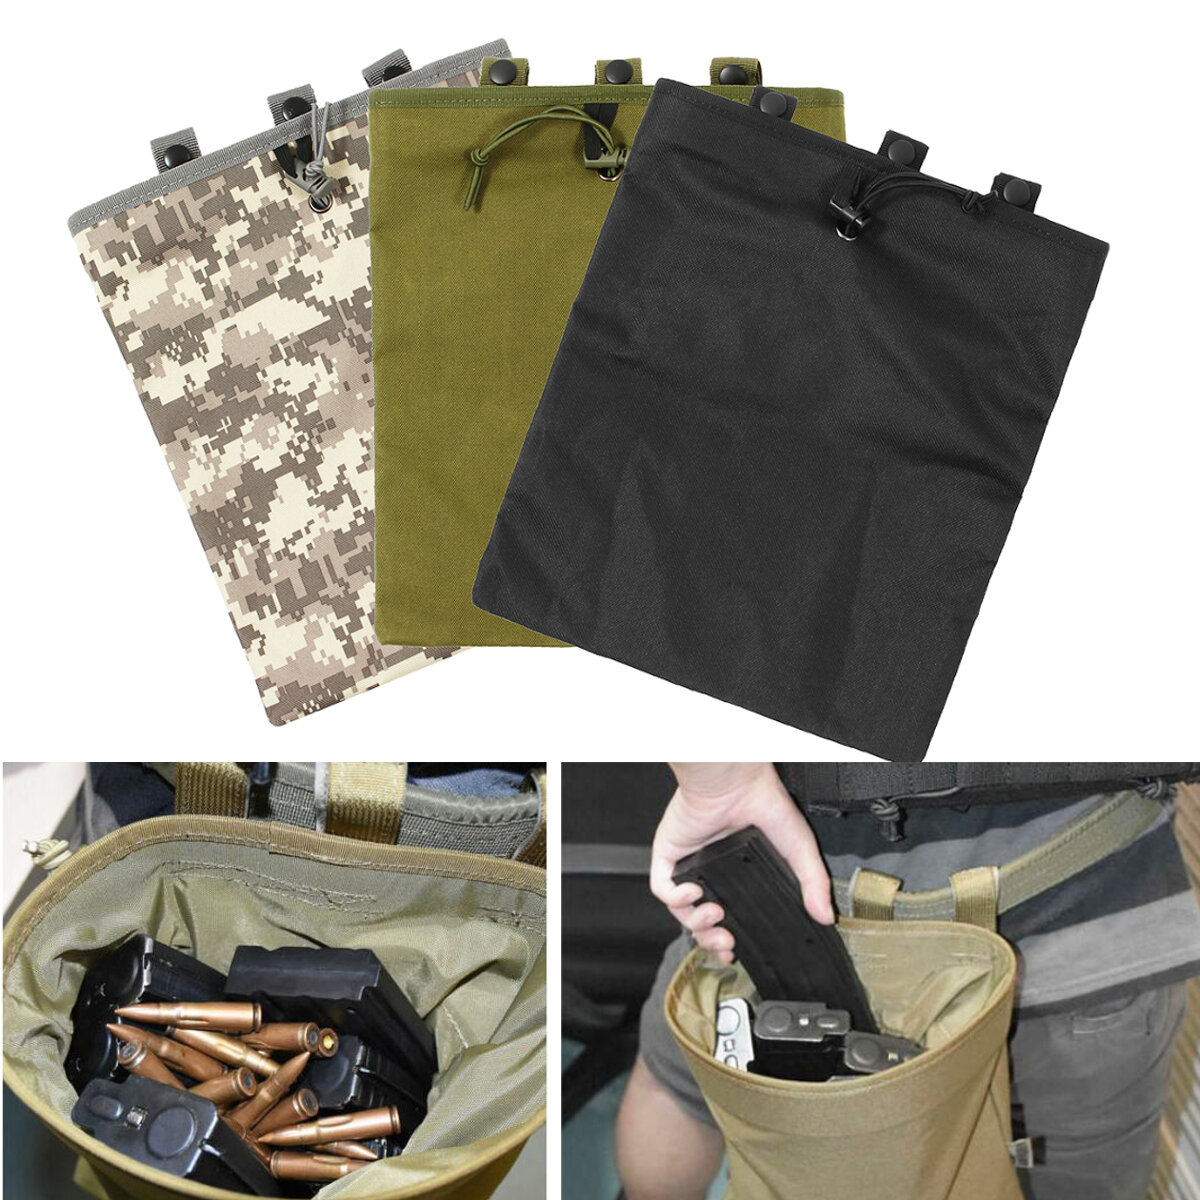 30x25cm Oxford Fabric Tactical Bag Magazine Pouch Holster Ammo Bag for Hunting Fishing